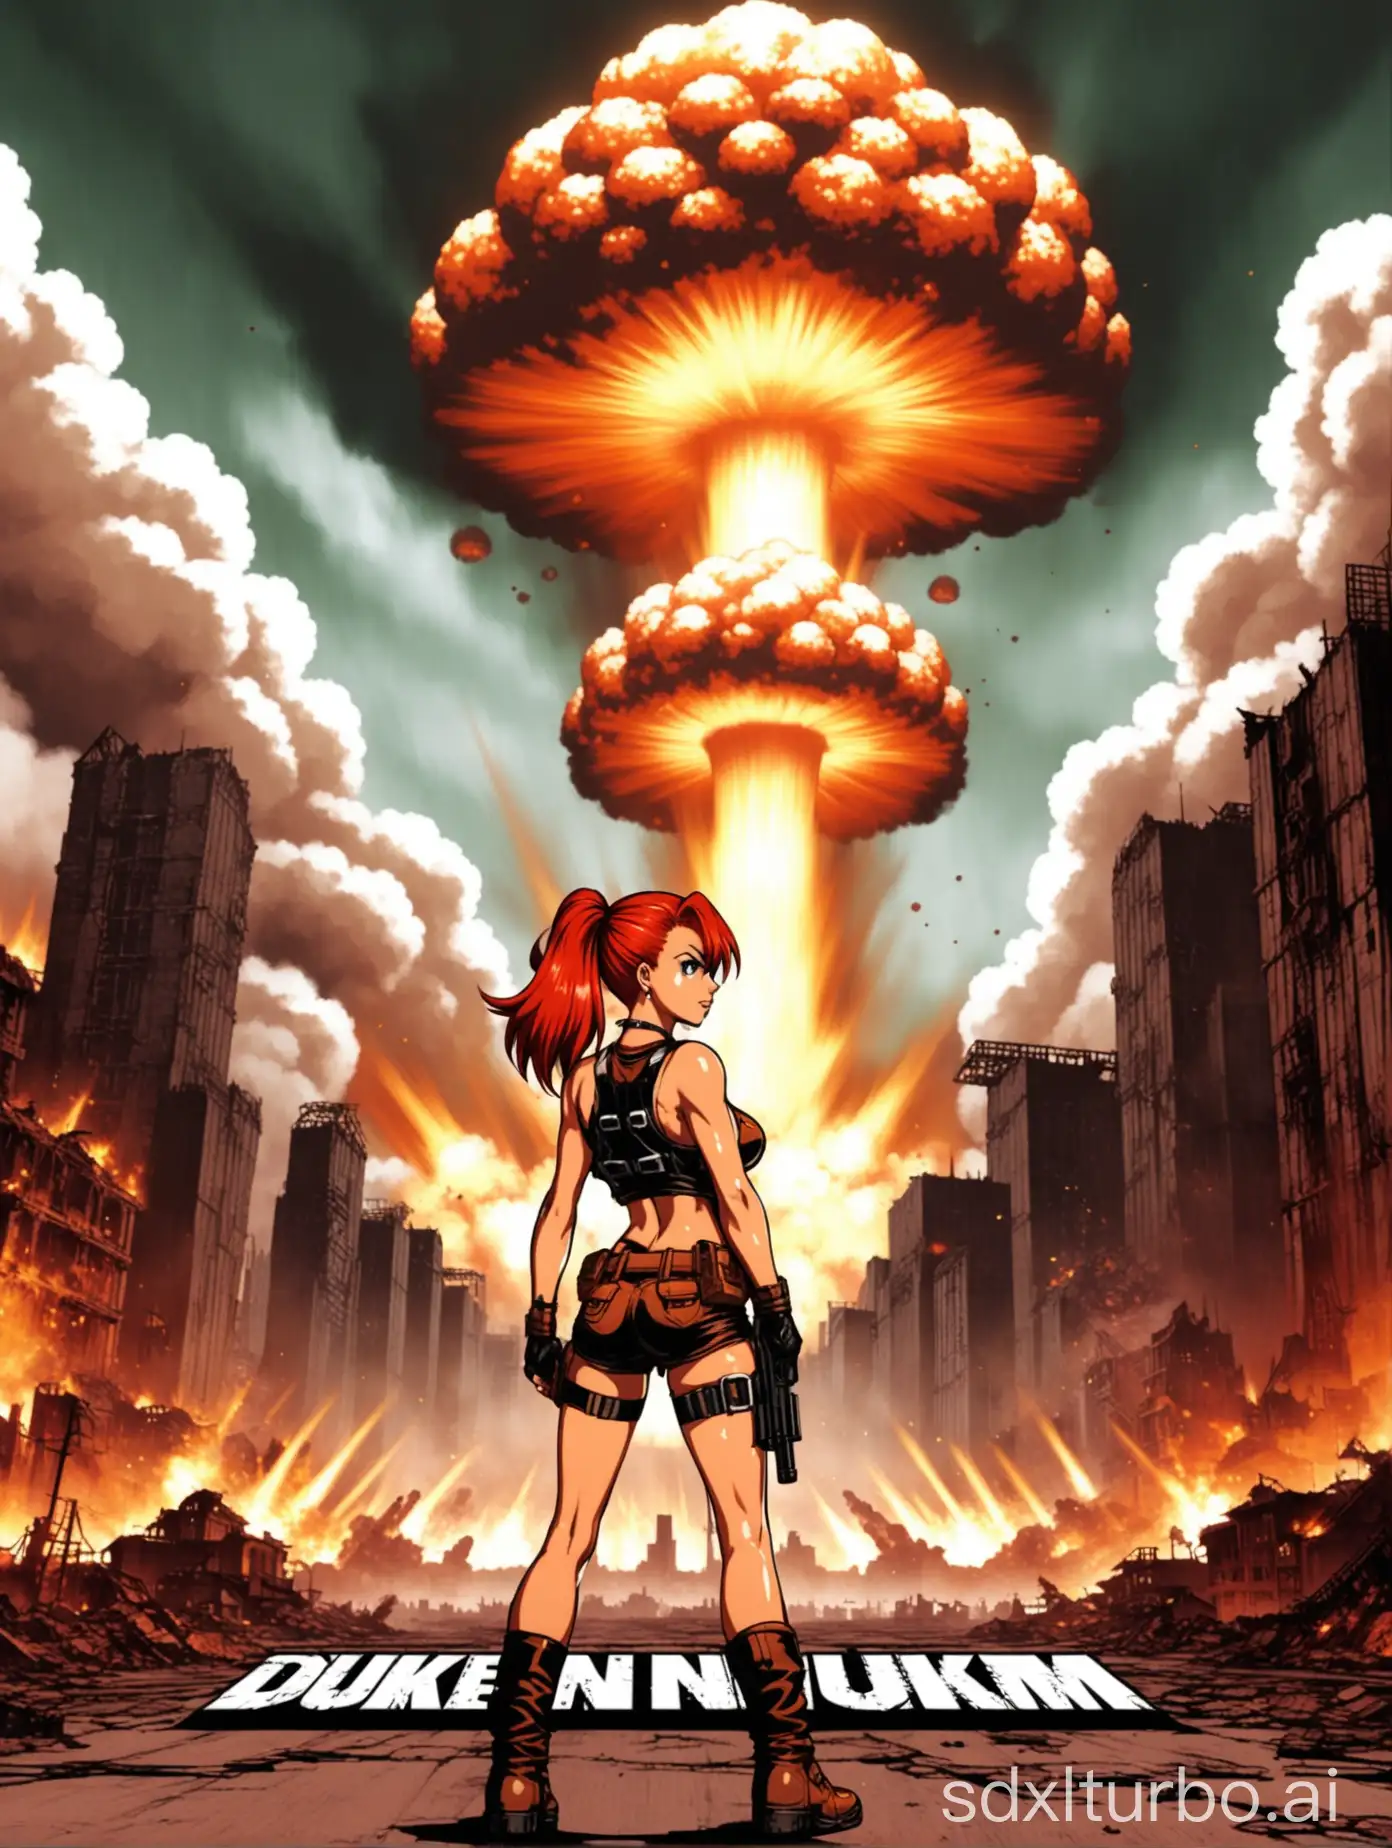 Redhead-Anime-Girl-in-PostApocalyptic-Cityscape-with-Mushroom-Cloud